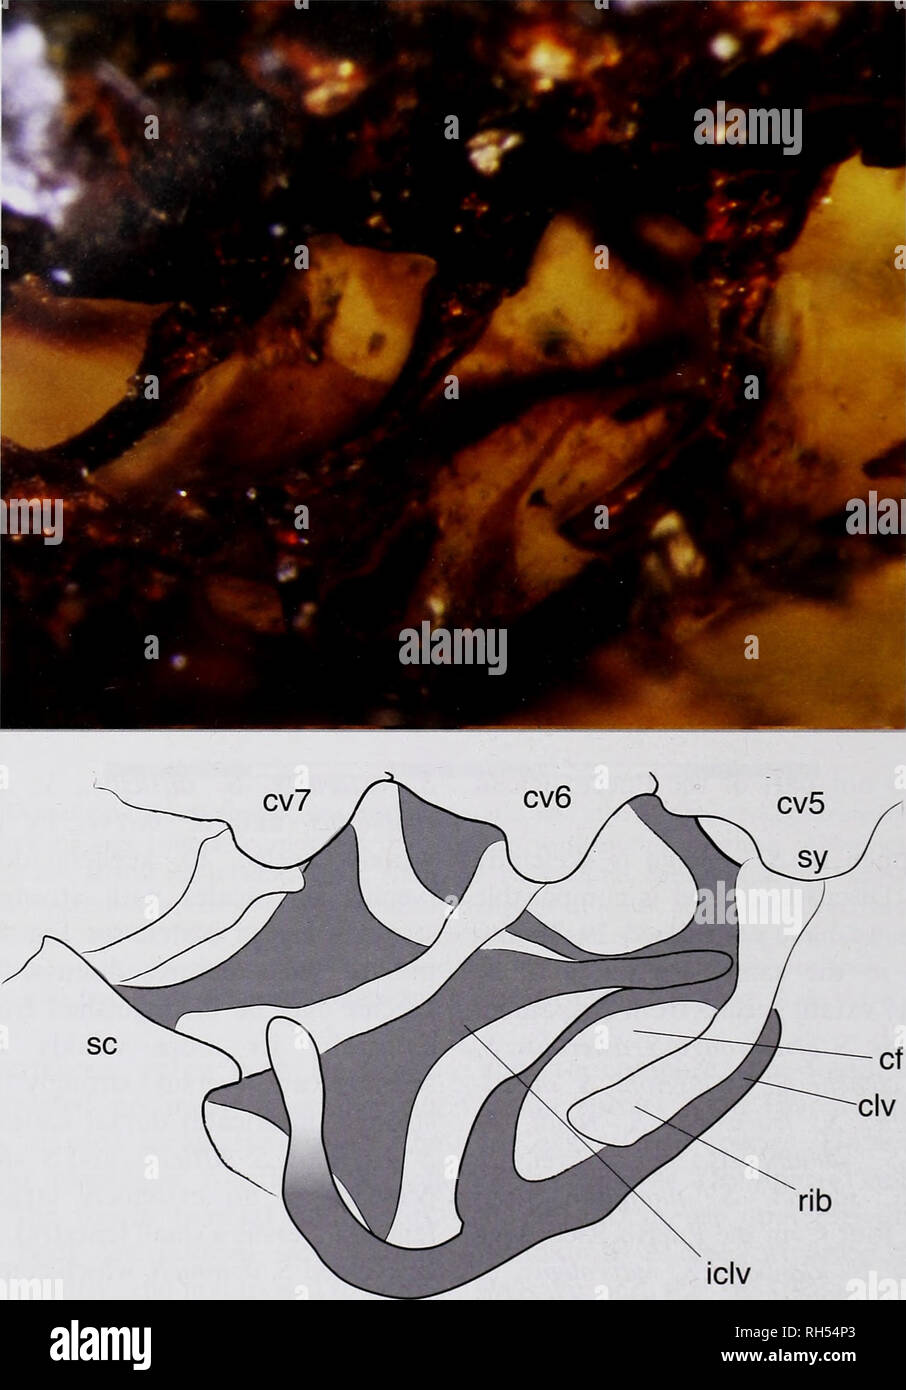 . Breviora. Zoology; Paleontology. BREVIORA No. 529. Figure 6. Sphaerodactylus ciguapa sp. nov. in dorsolateral view showing portions of the pectoral girdle. Scale bar = 2 mm. the piece and in some spots it is exposed as a result of the polishing process. The amber has a partial fracture plane at the posterior end of the specimen, but the two portions remain together. The amber matrix embed- ding the specimen is semitransparent yellow and the bone color is dark brown, providing a contrast that facilitates observation oi&quot; the whole specimen (Fig. 2). The specimen is mainly skeletonized (Fi Stock Photo